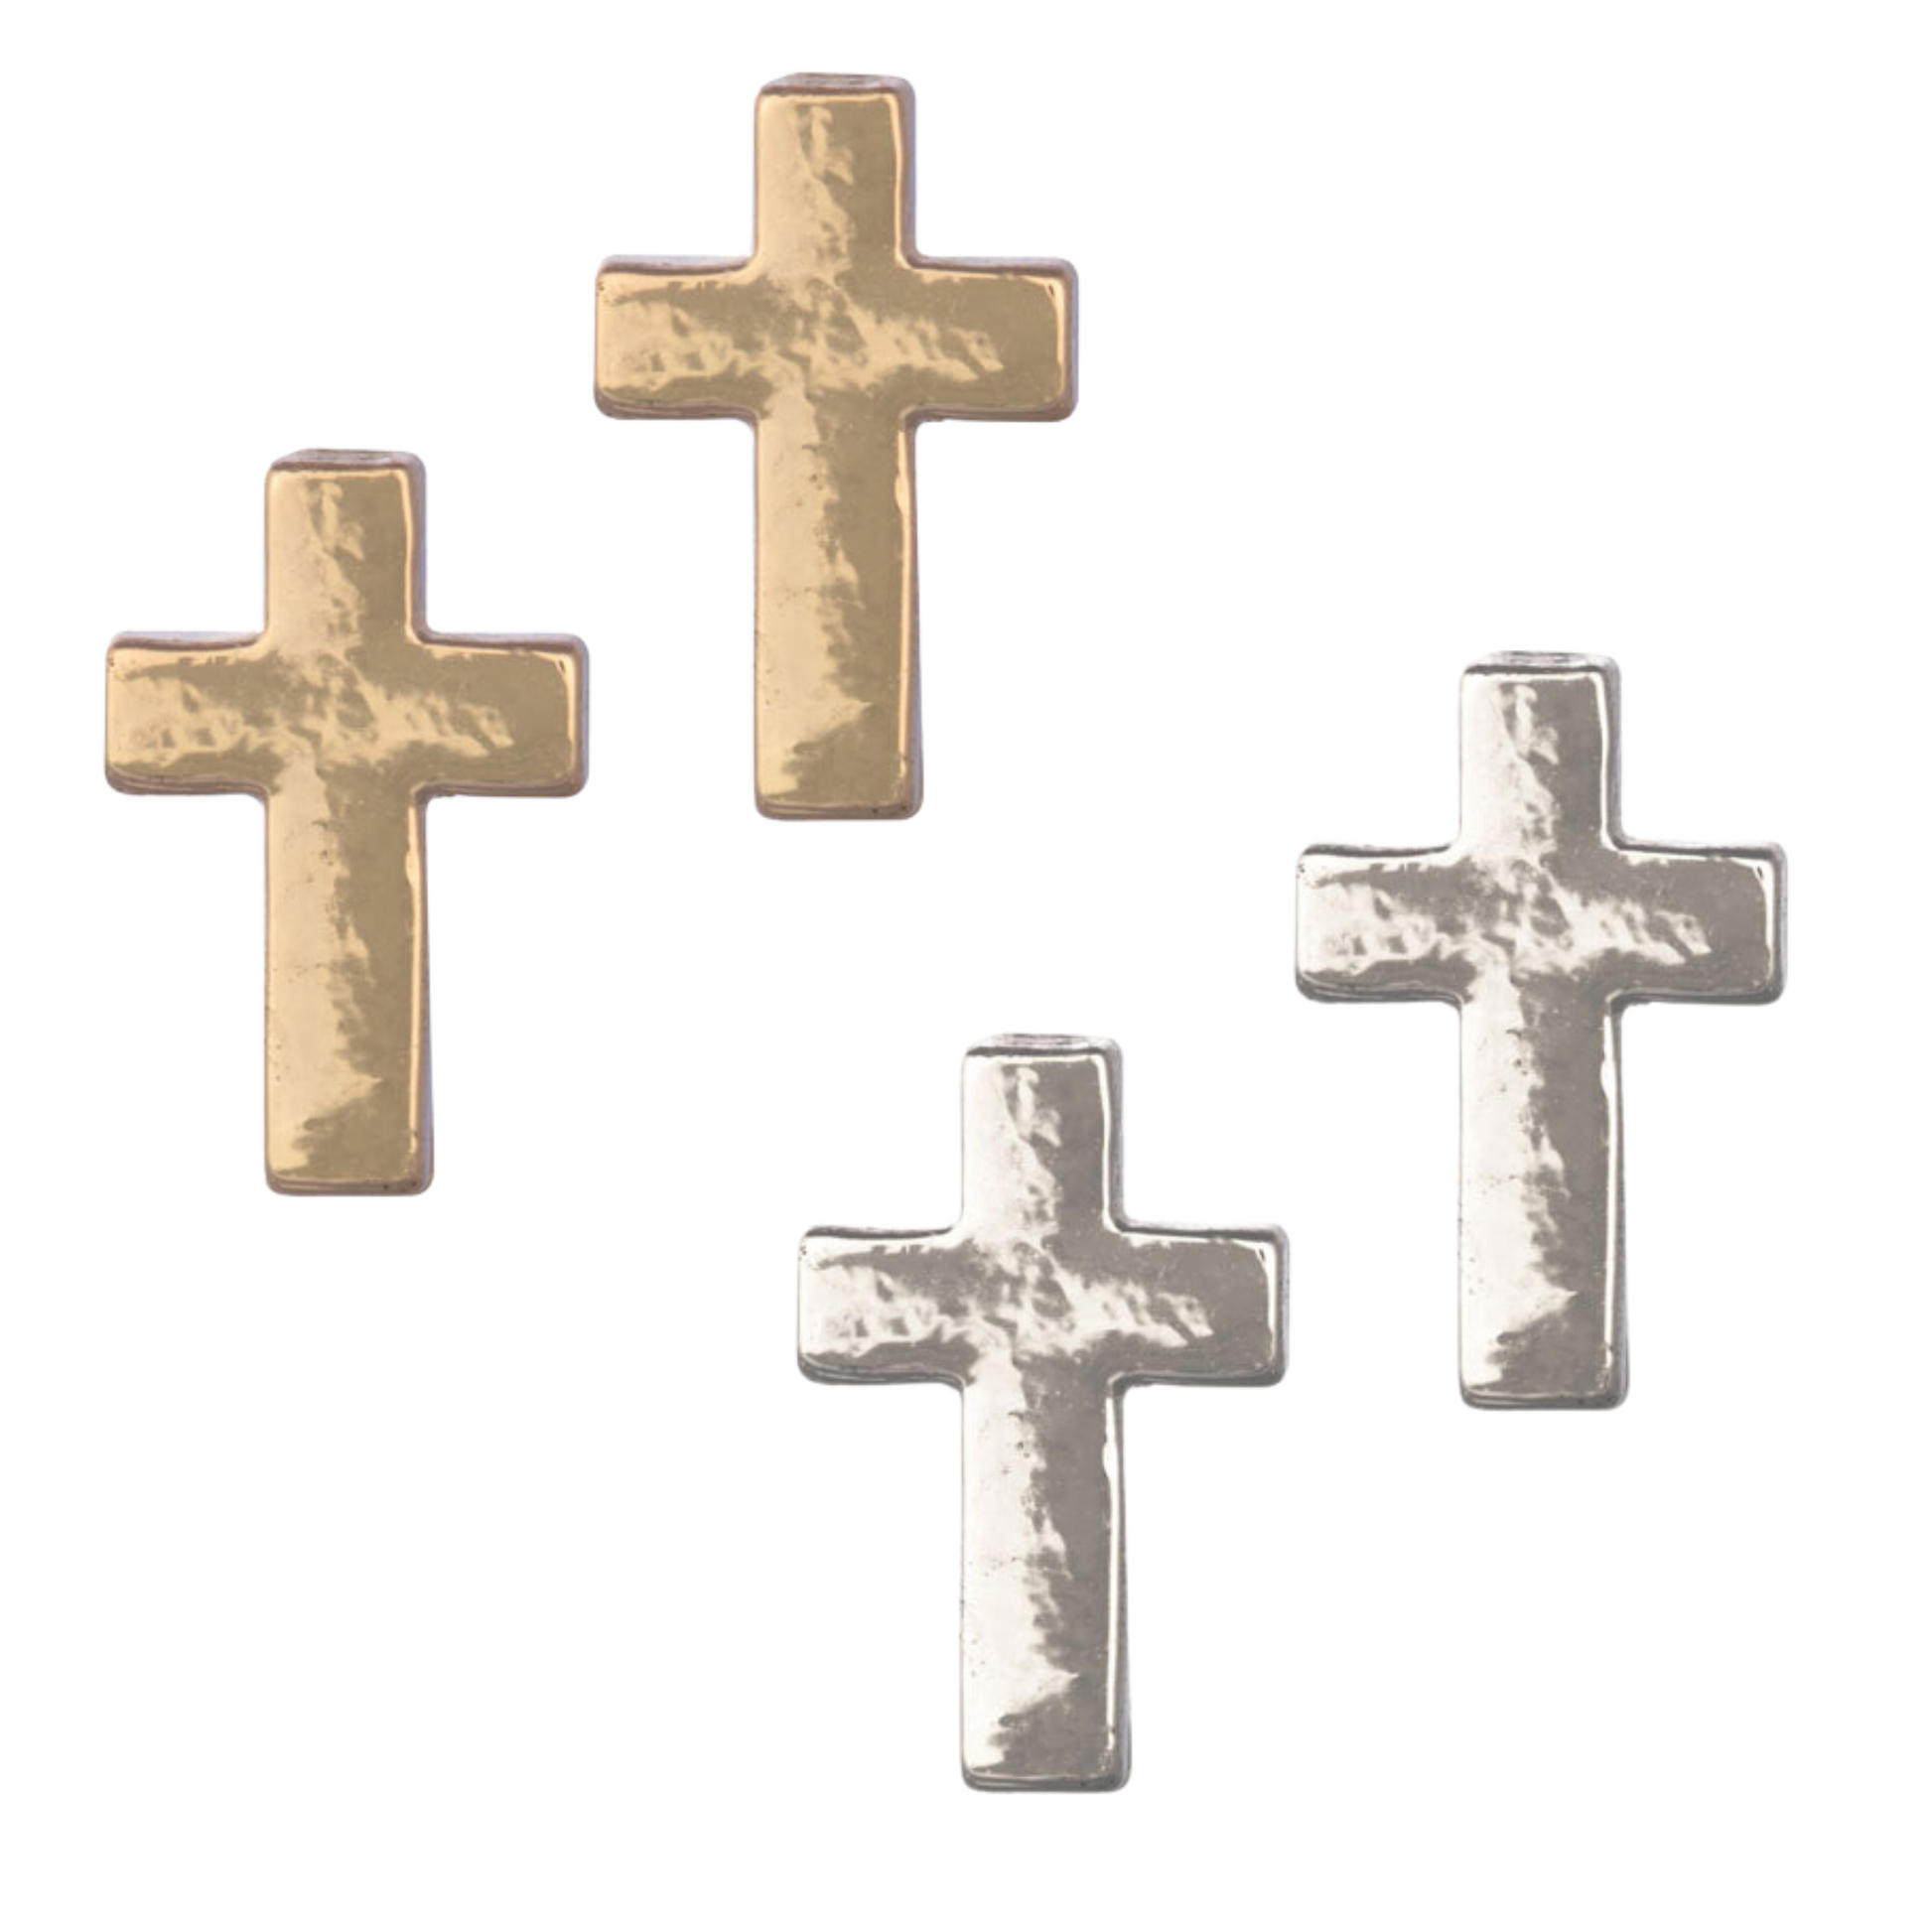 small cross stud earrings. Available in silver and gold